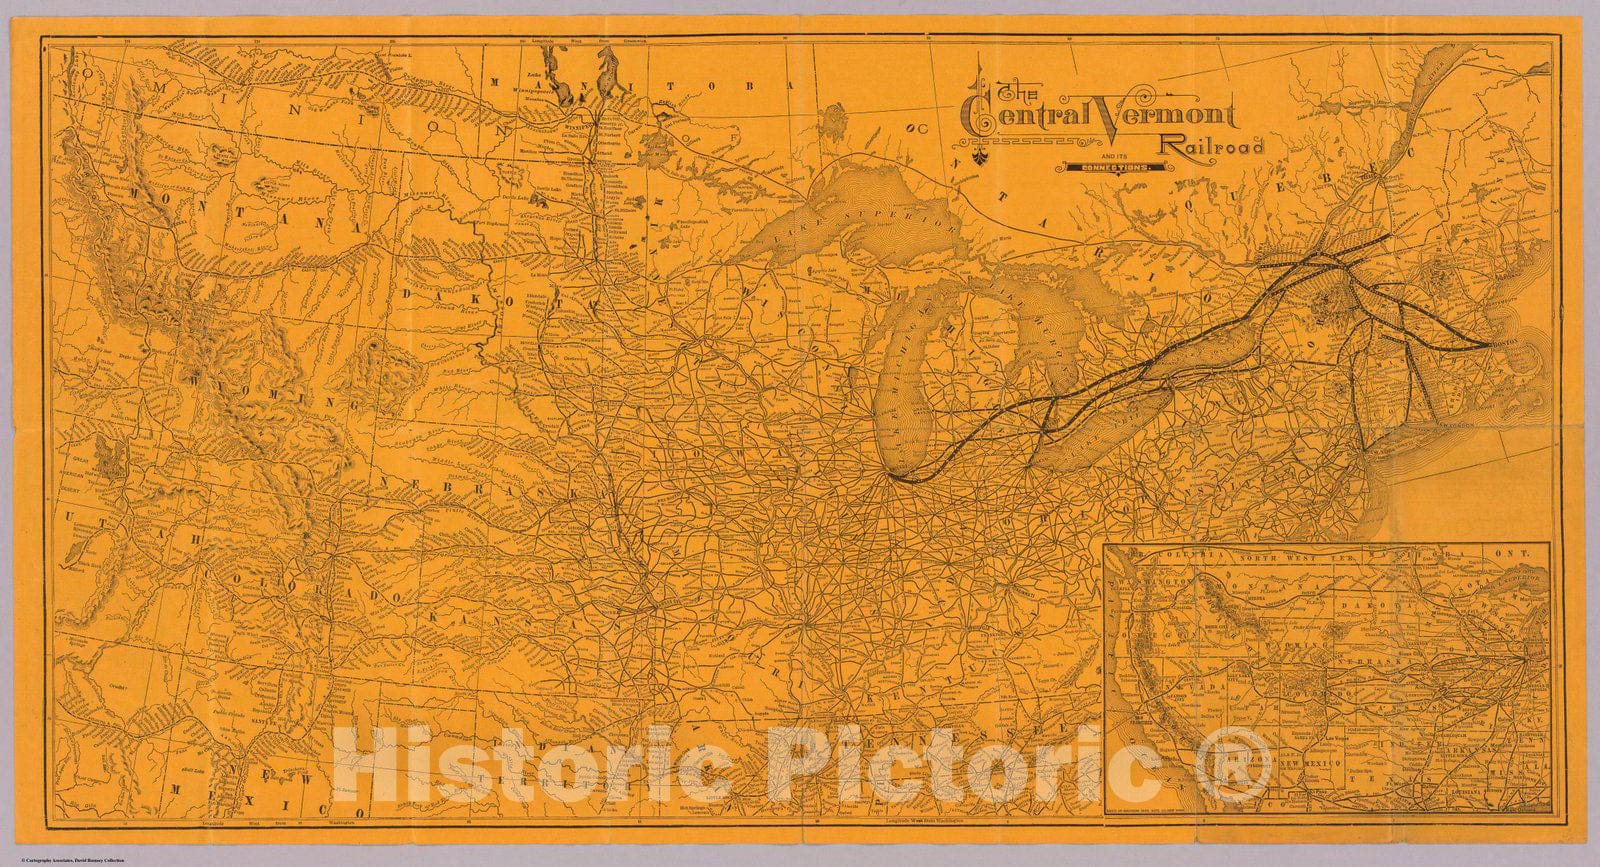 Historic Map : Timetable Map, Central Vermont Railroad, connections. 1887 - Vintage Wall Art